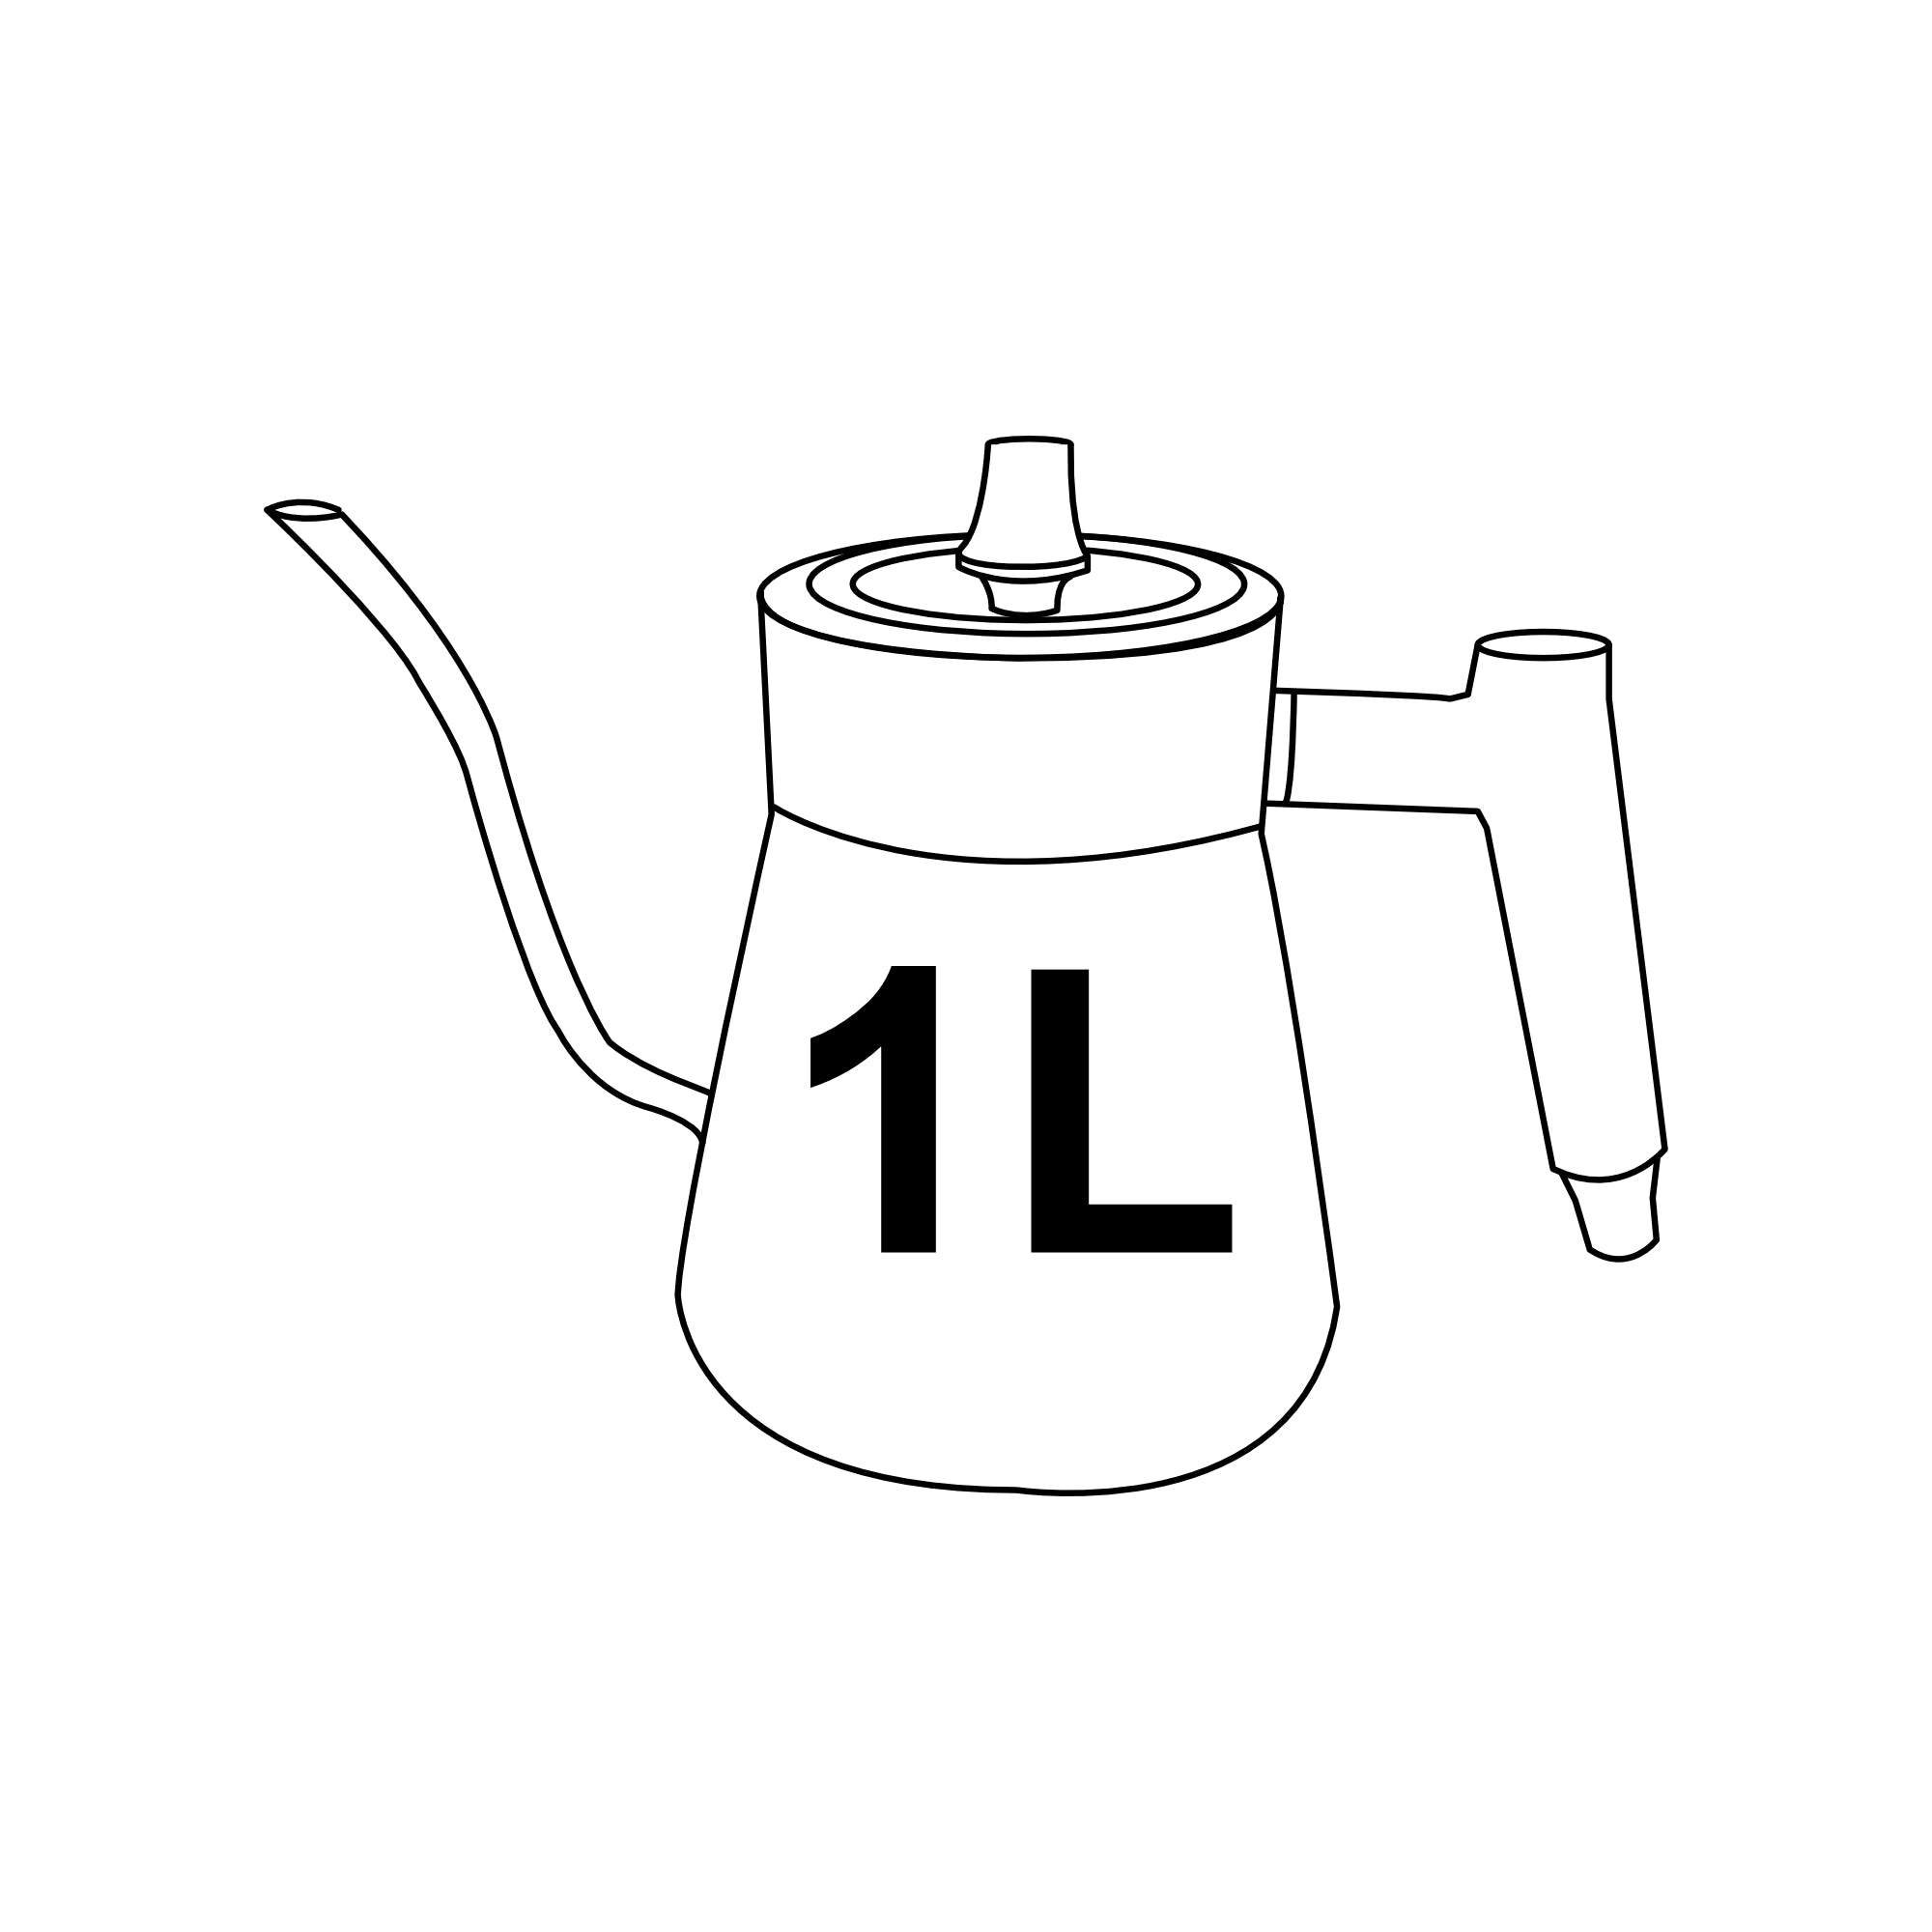 kettle drawing capacity 1